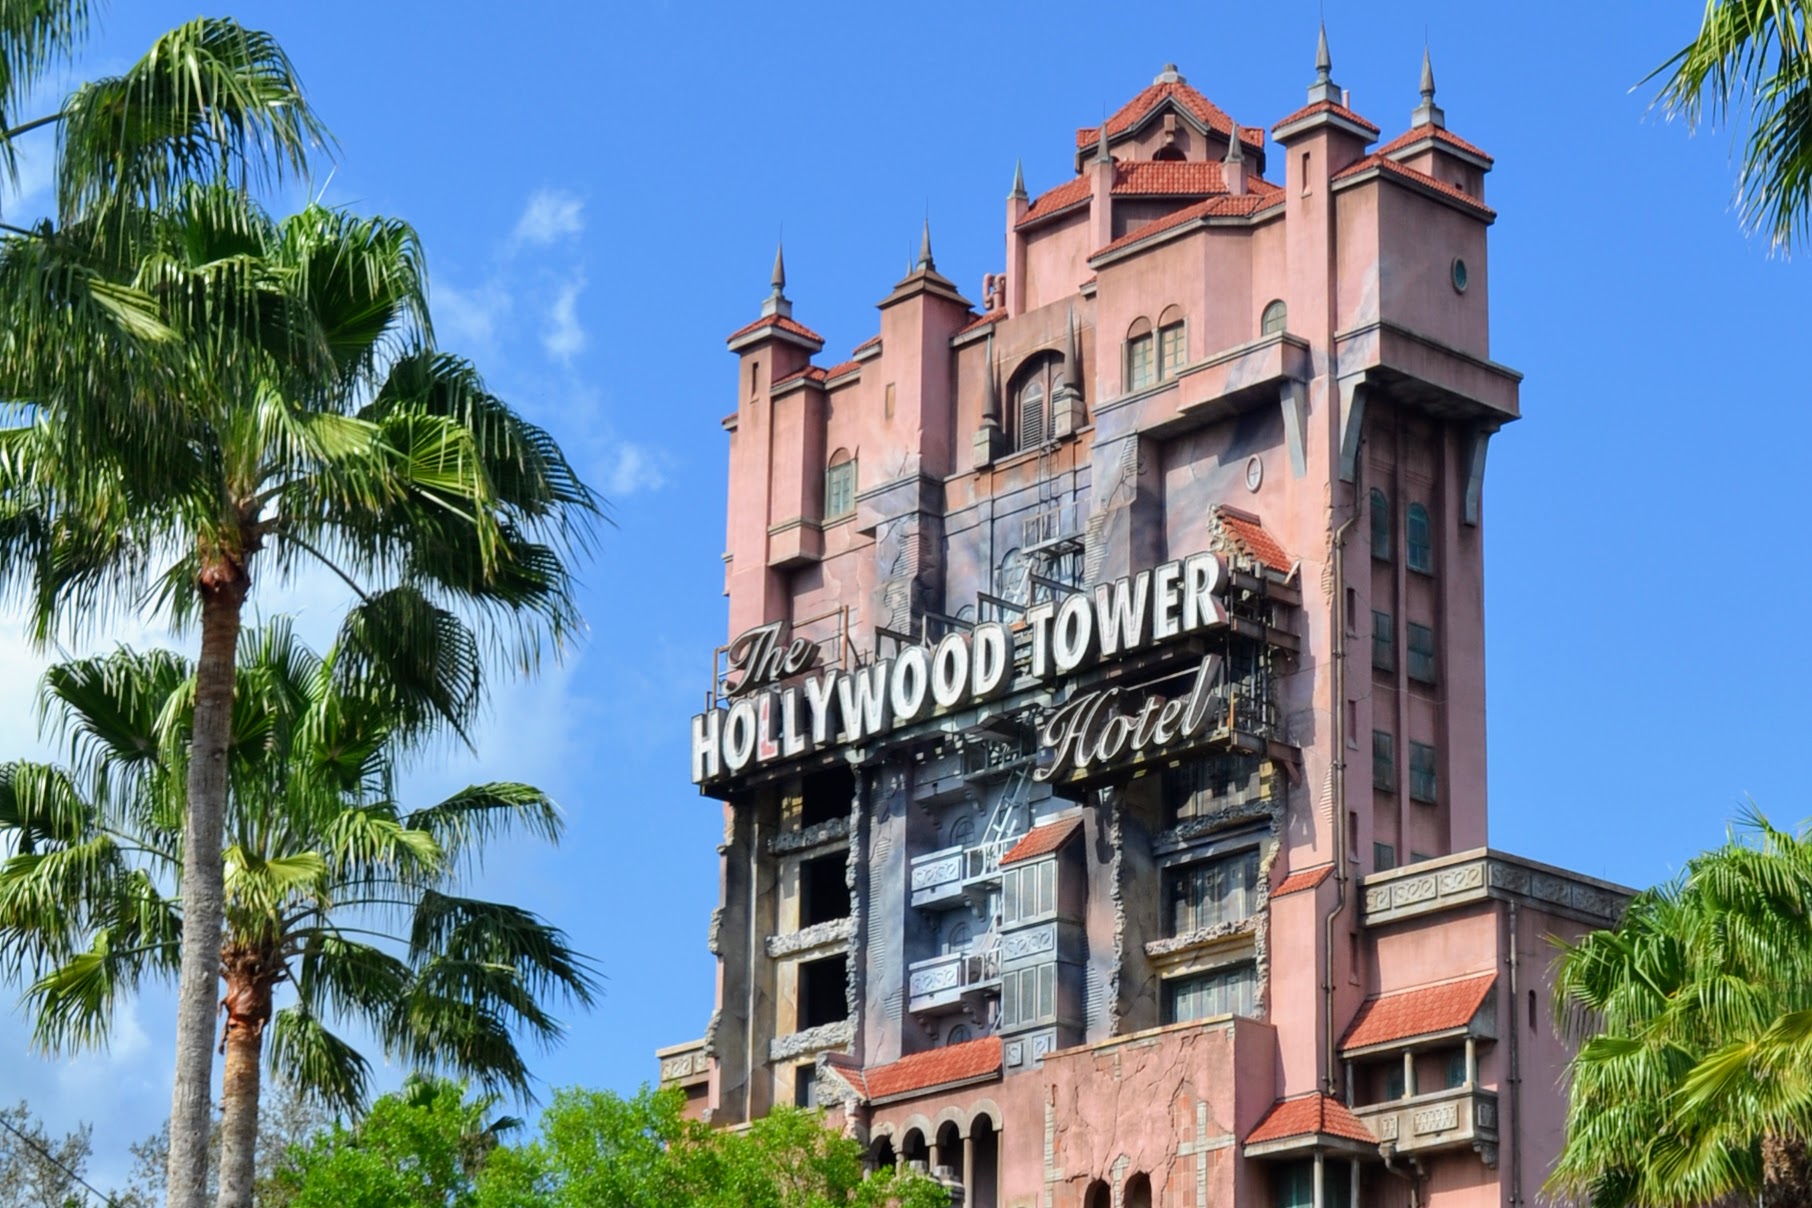 Hollywood Studios FastPass Guide